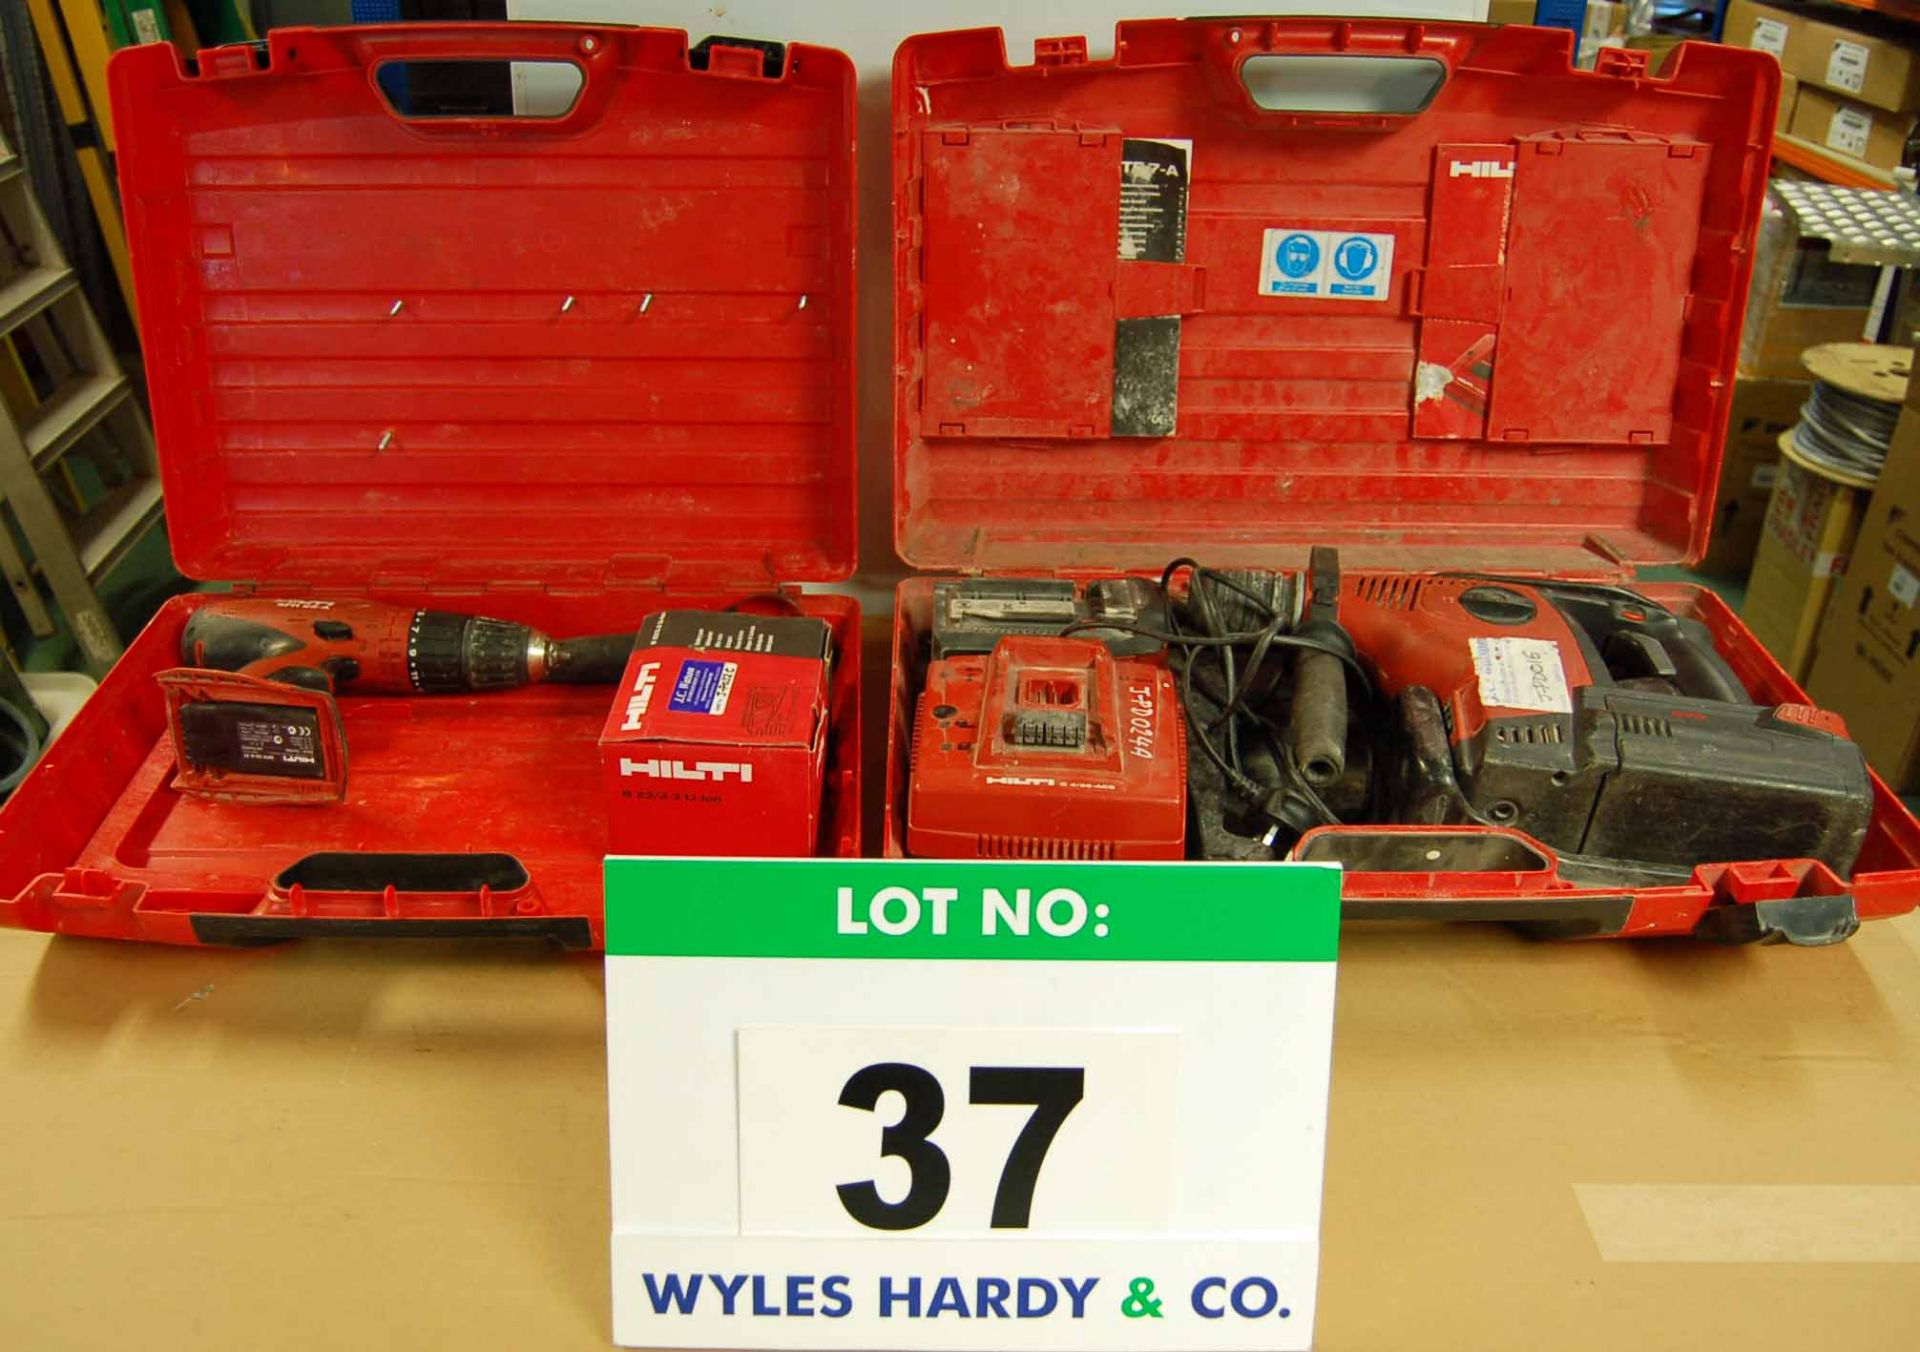 A HILTI TE 7A 36v Heavy Duty SDS Drill/Breaker with Two 3.3AH Batteries and Mains Charger and A